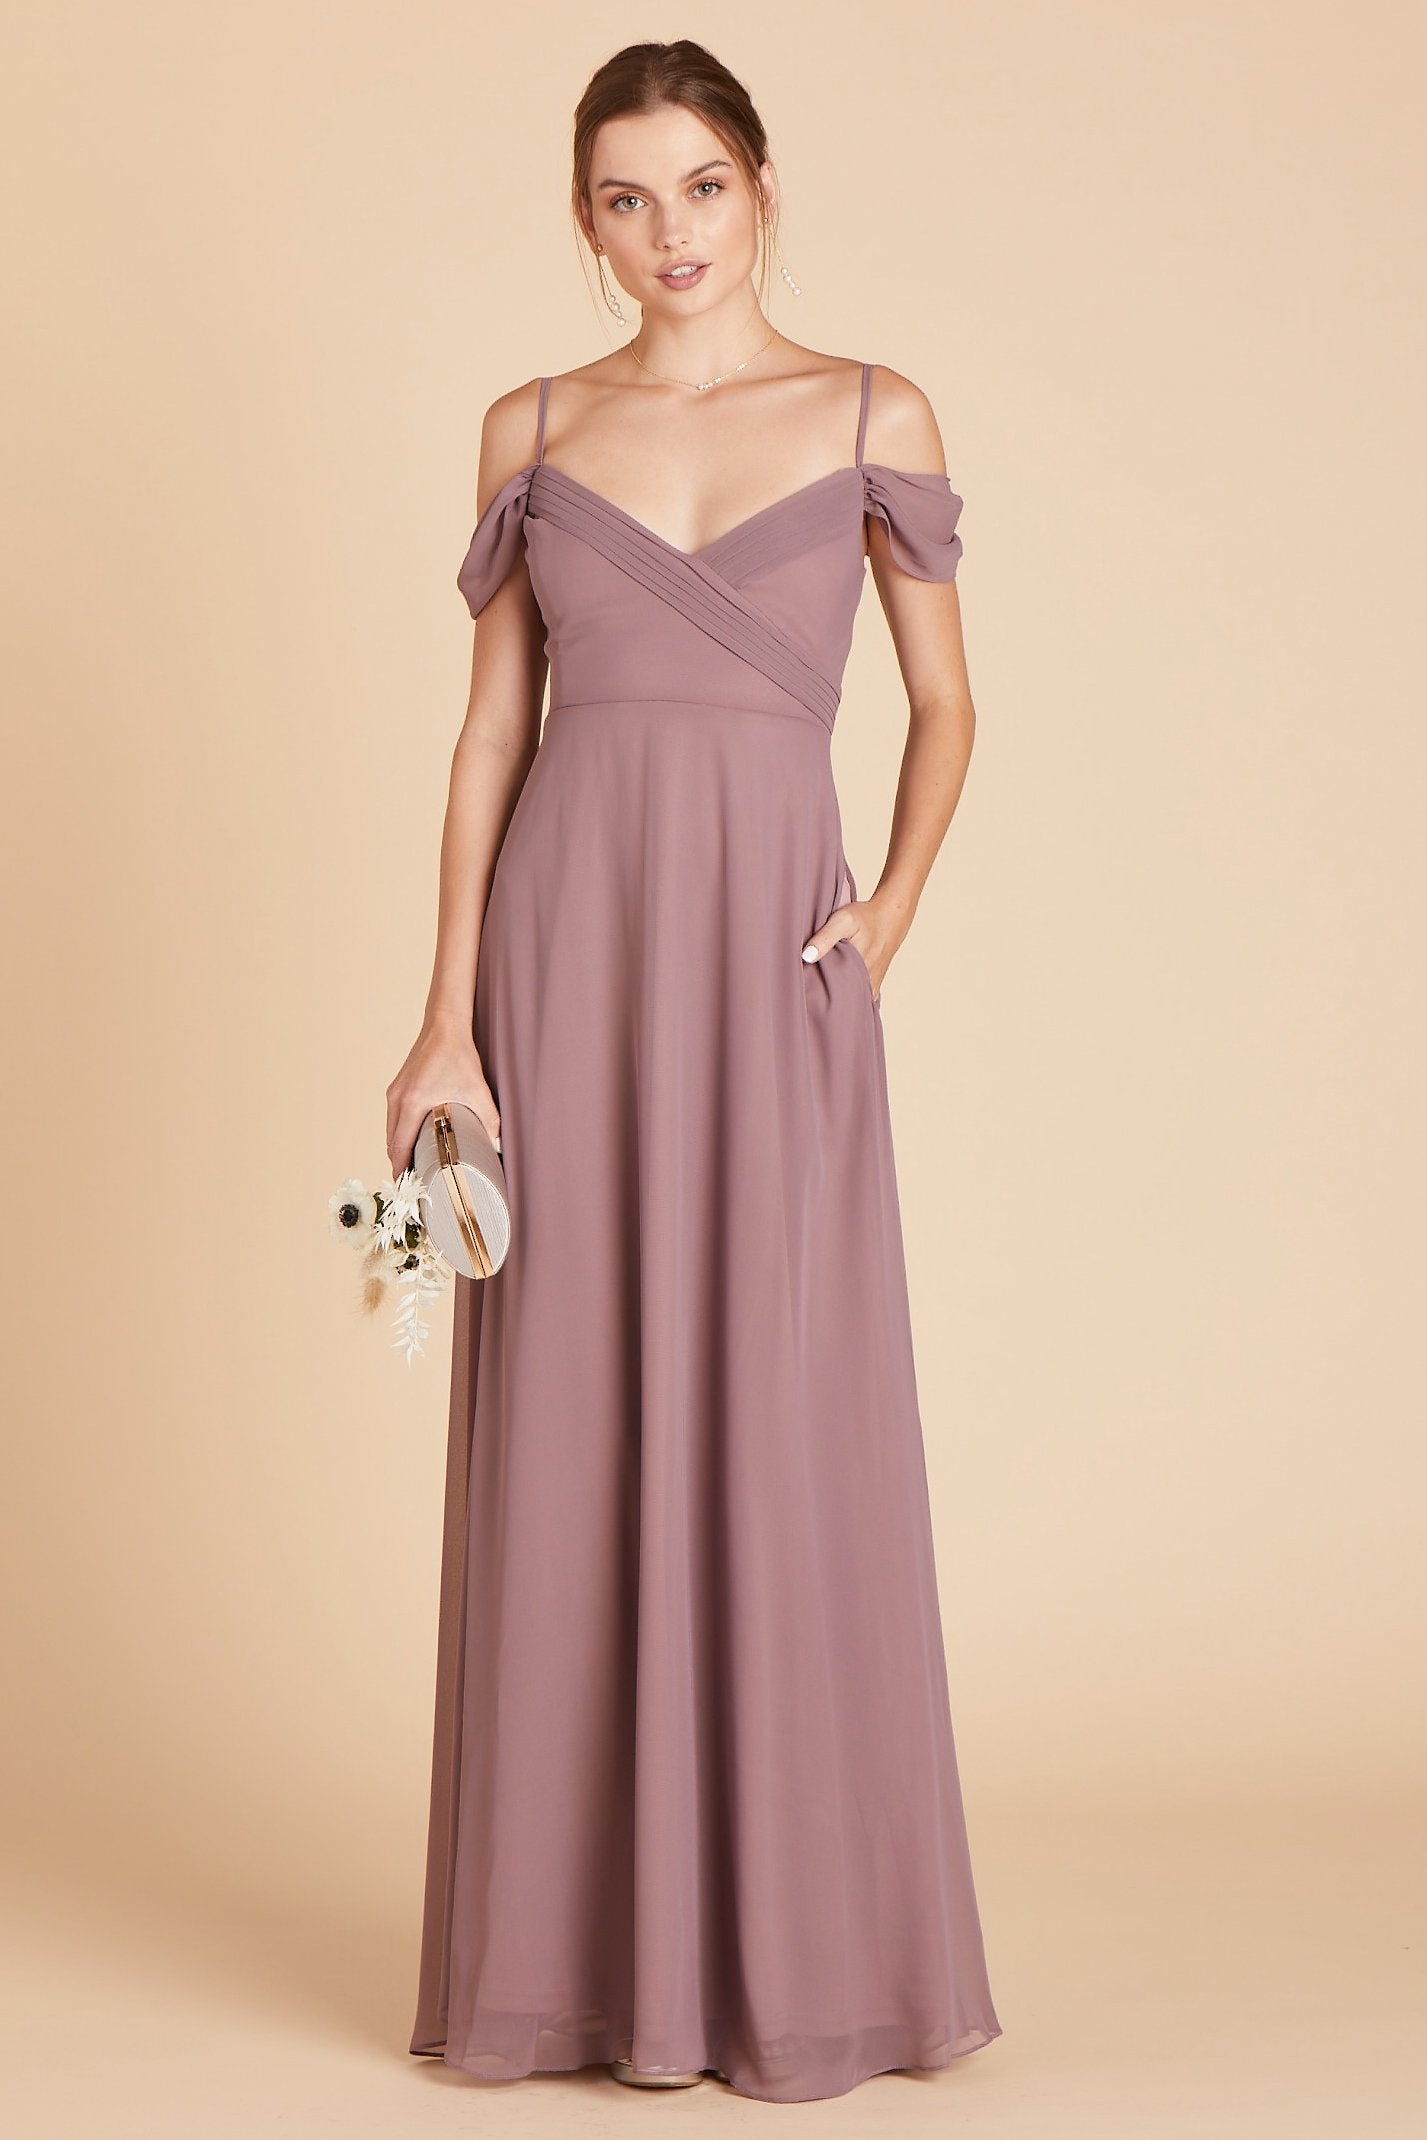 Spence convertible bridesmaid dress in dark mauve chiffon by Birdy Grey, front view with hand in pocket 